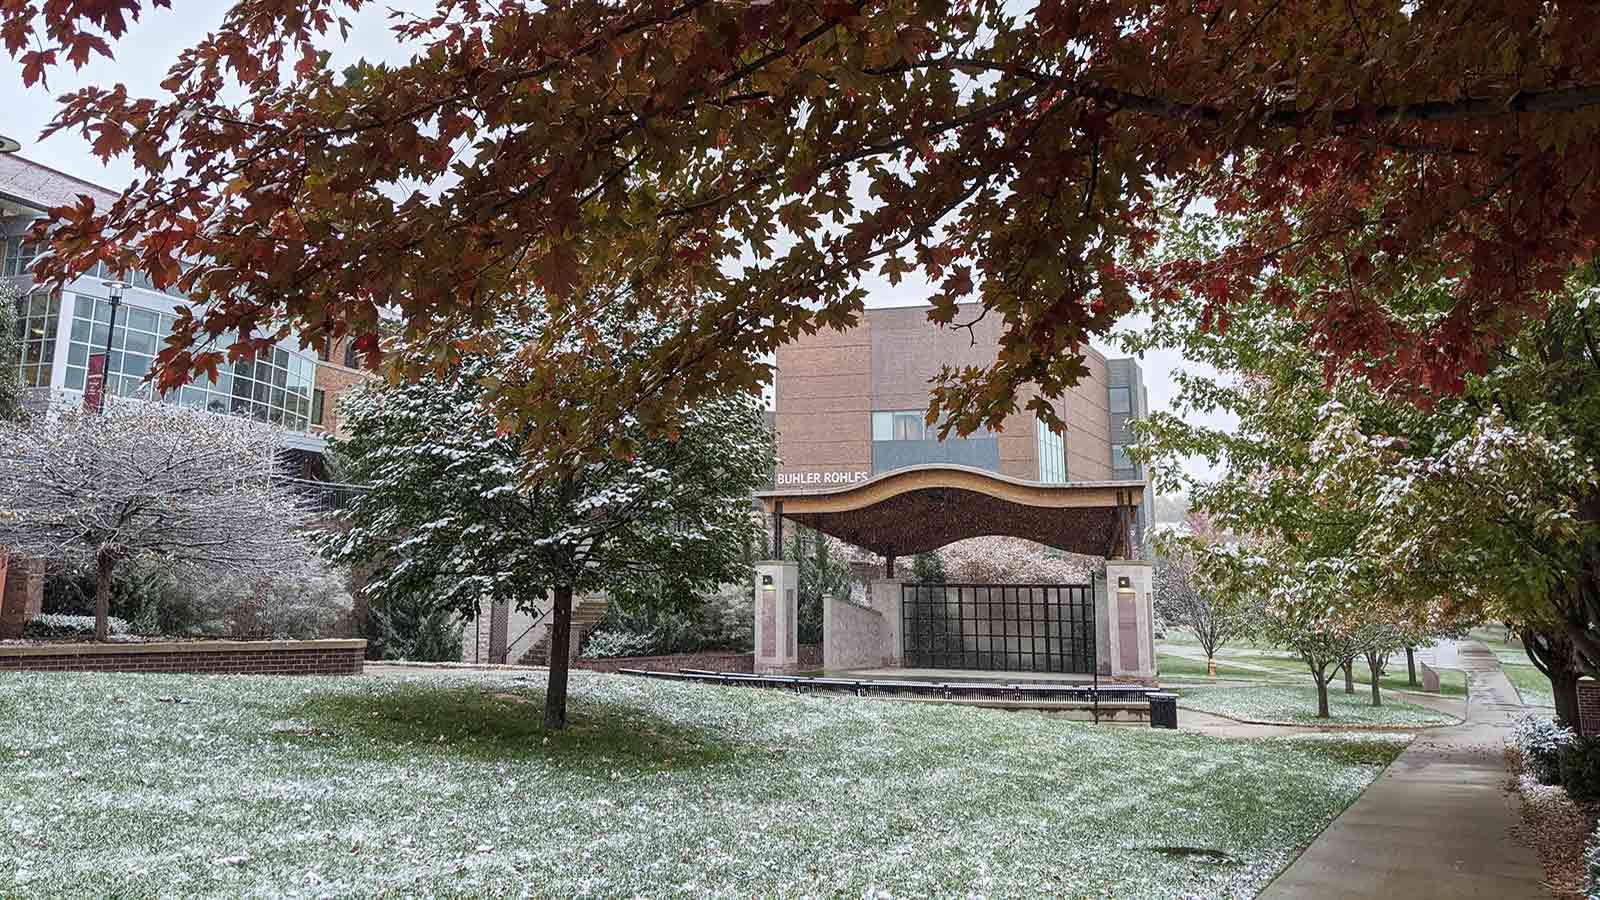 A snowy fall day at Morningside College.